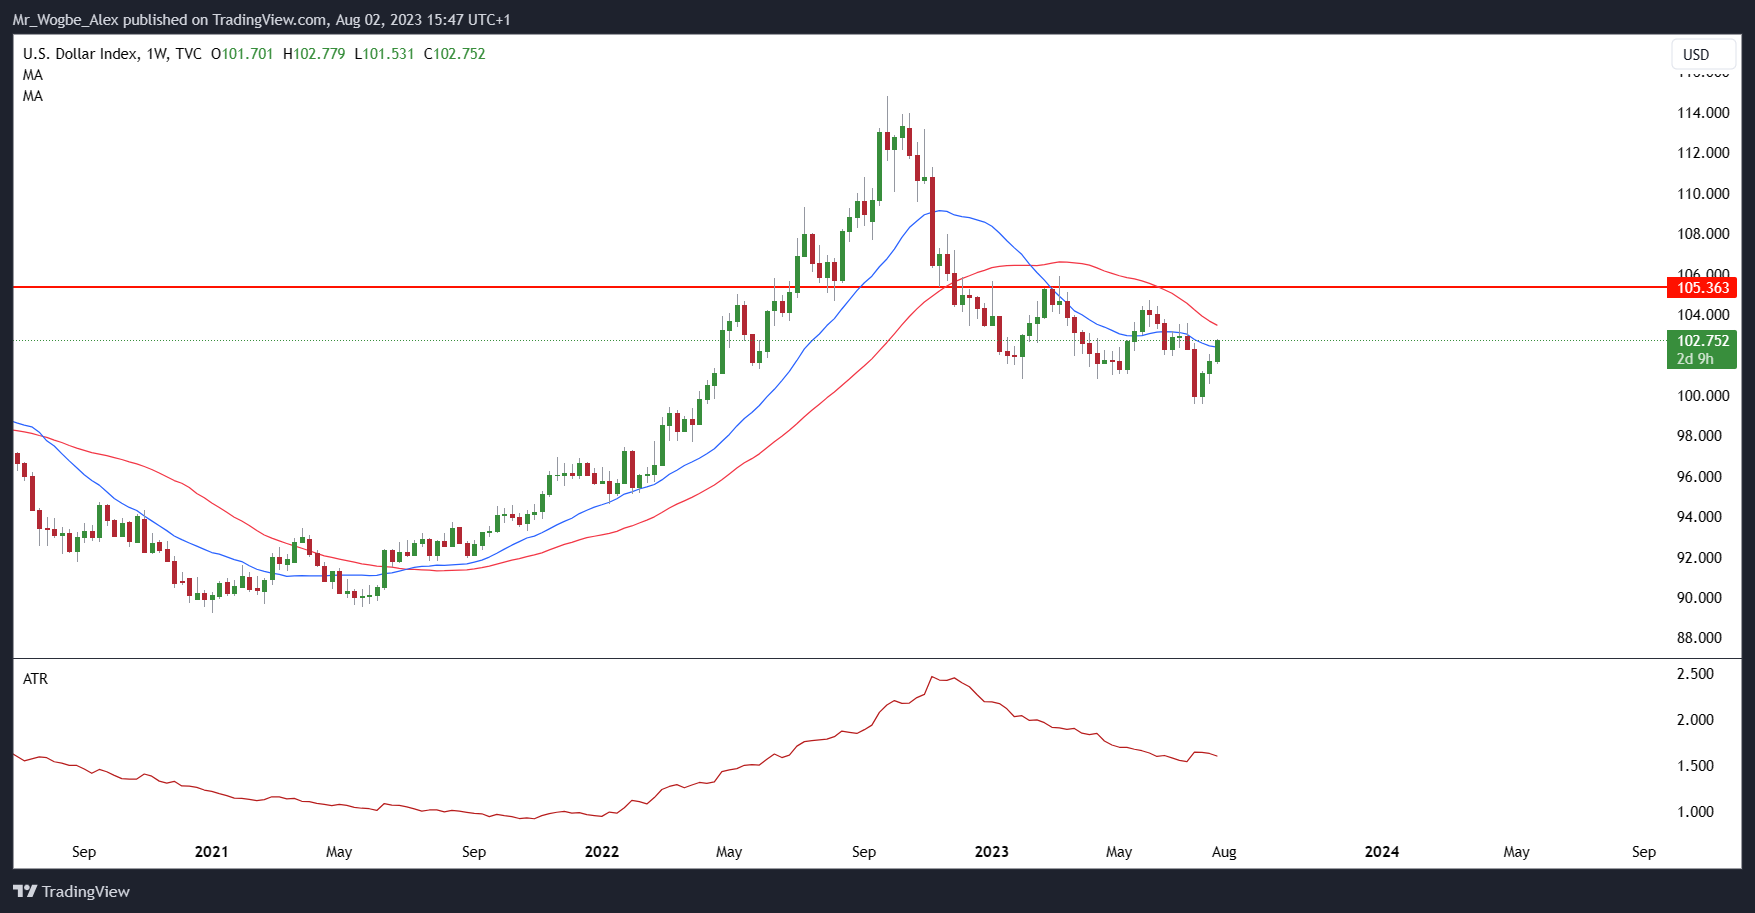 DXY daily chart from TradingView